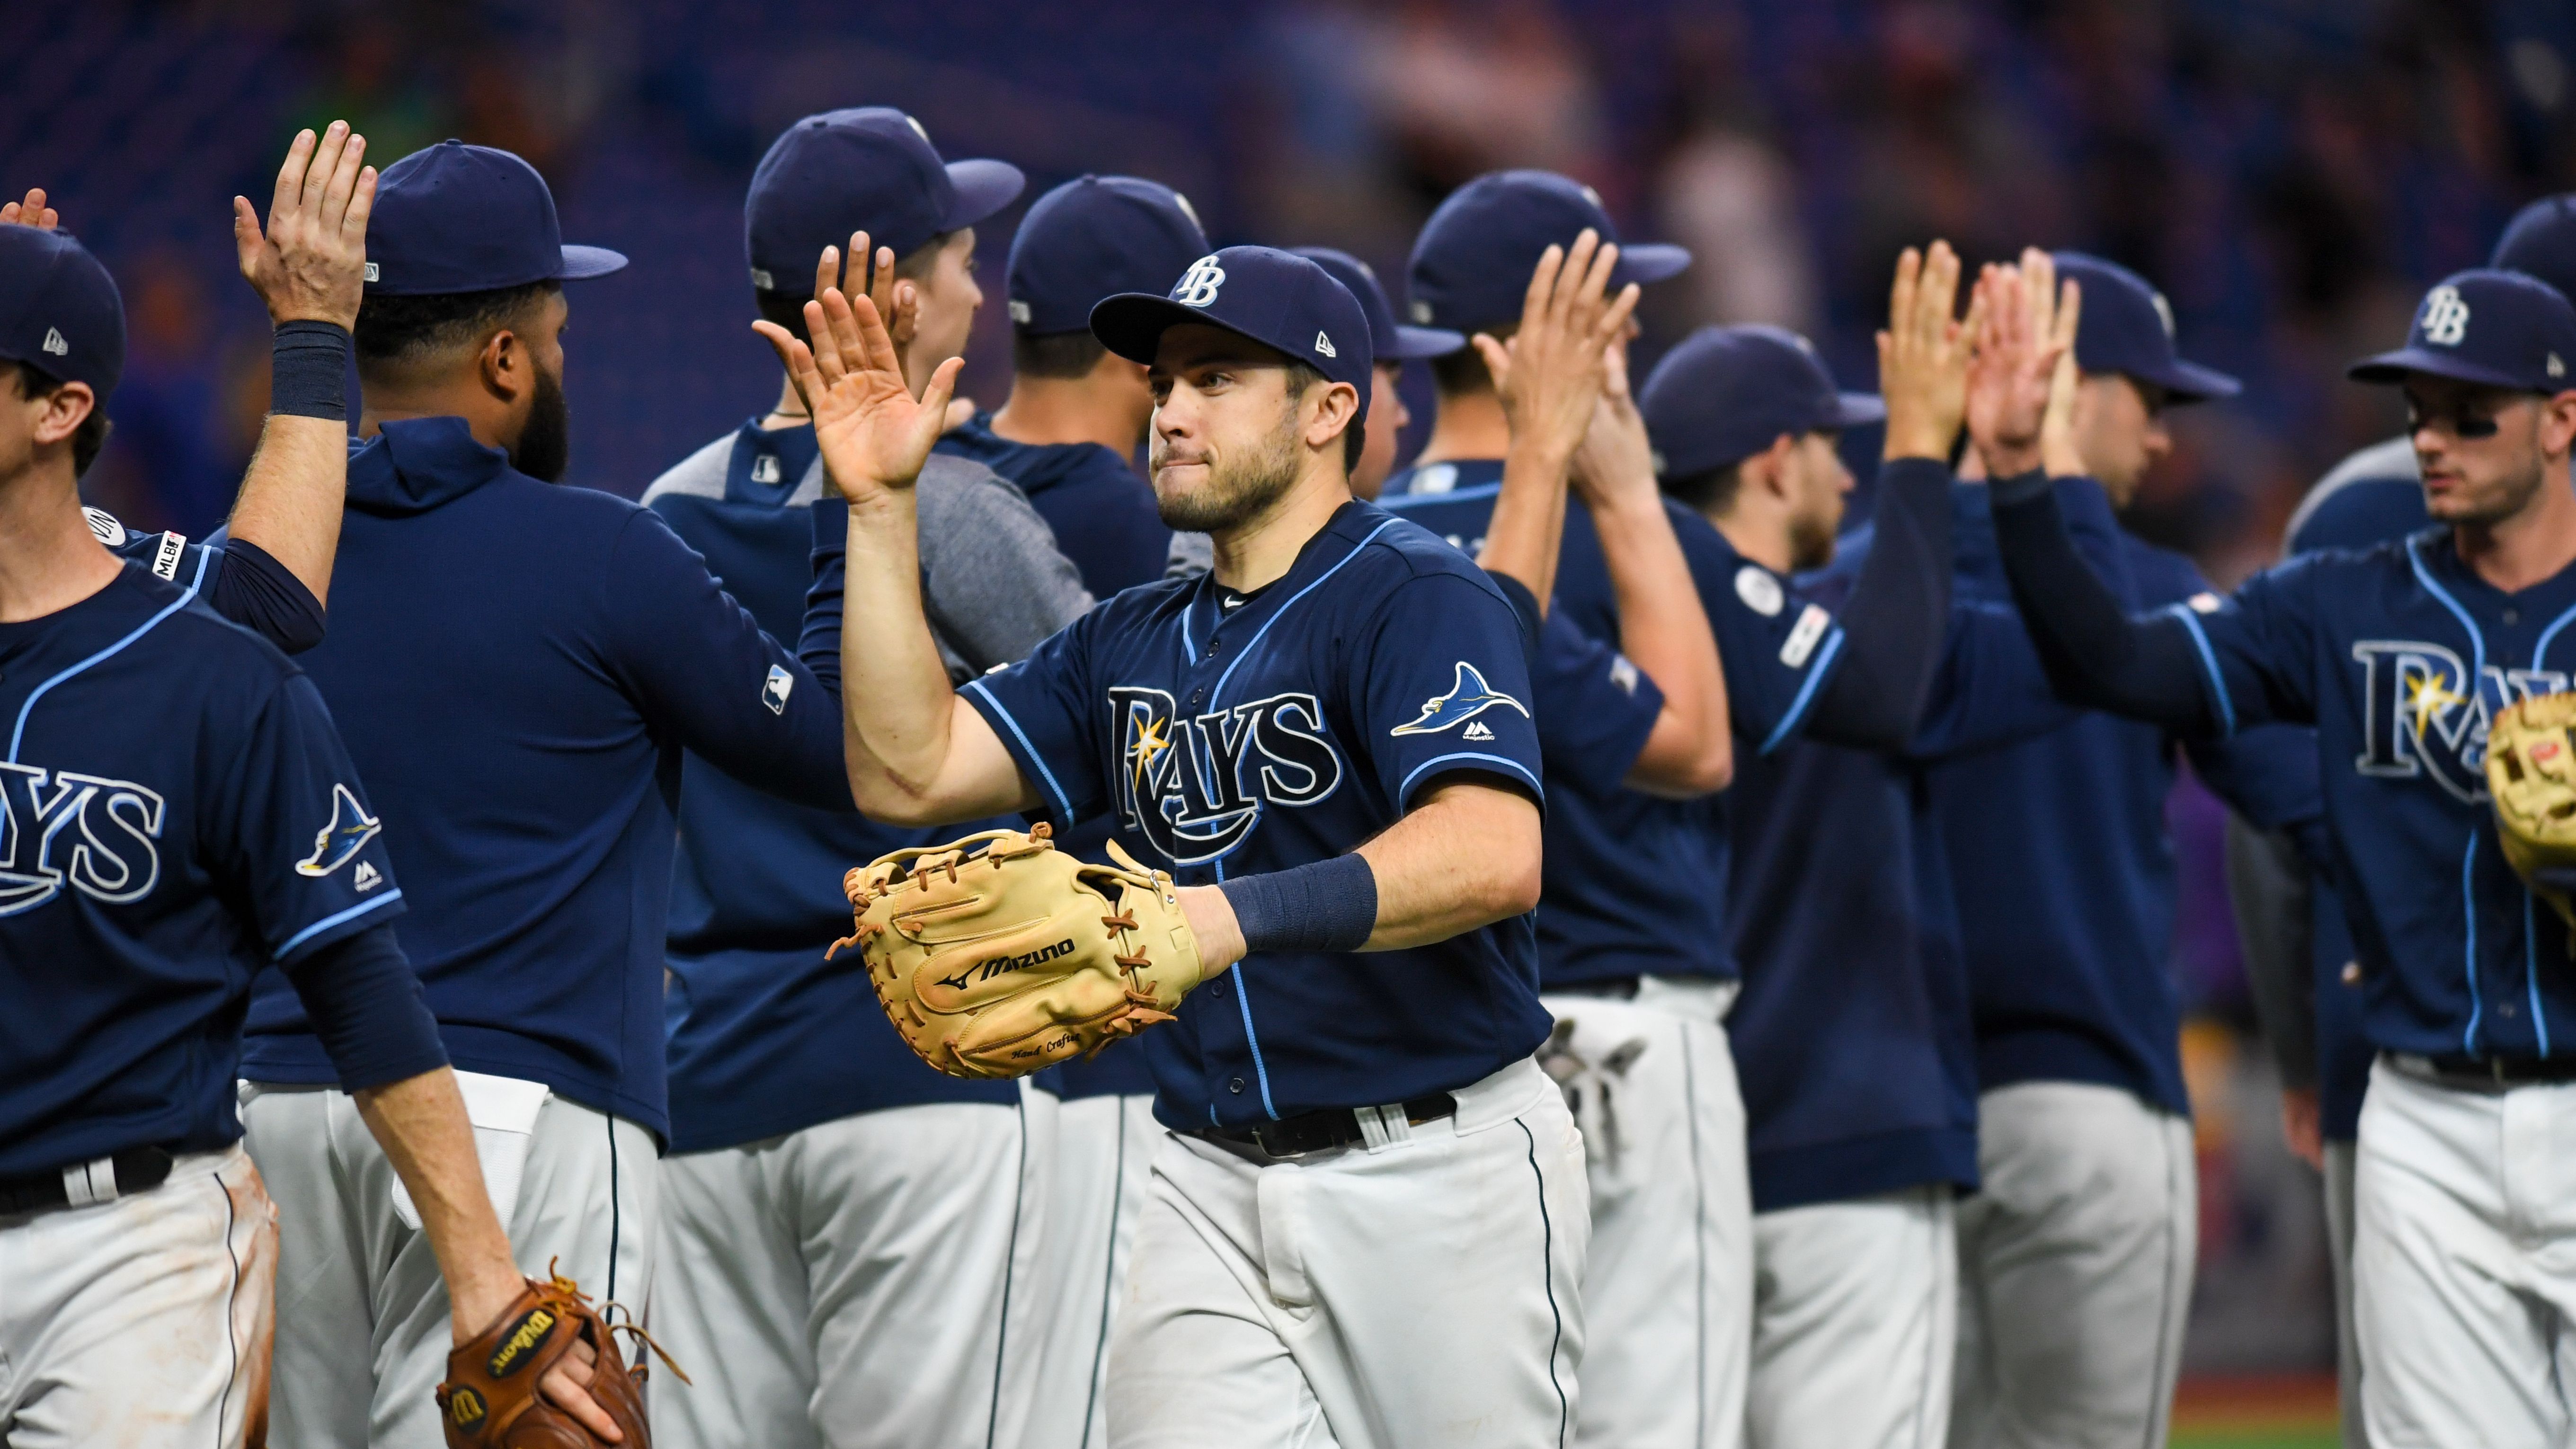 Here's how to watch the Rays play tonight, only on